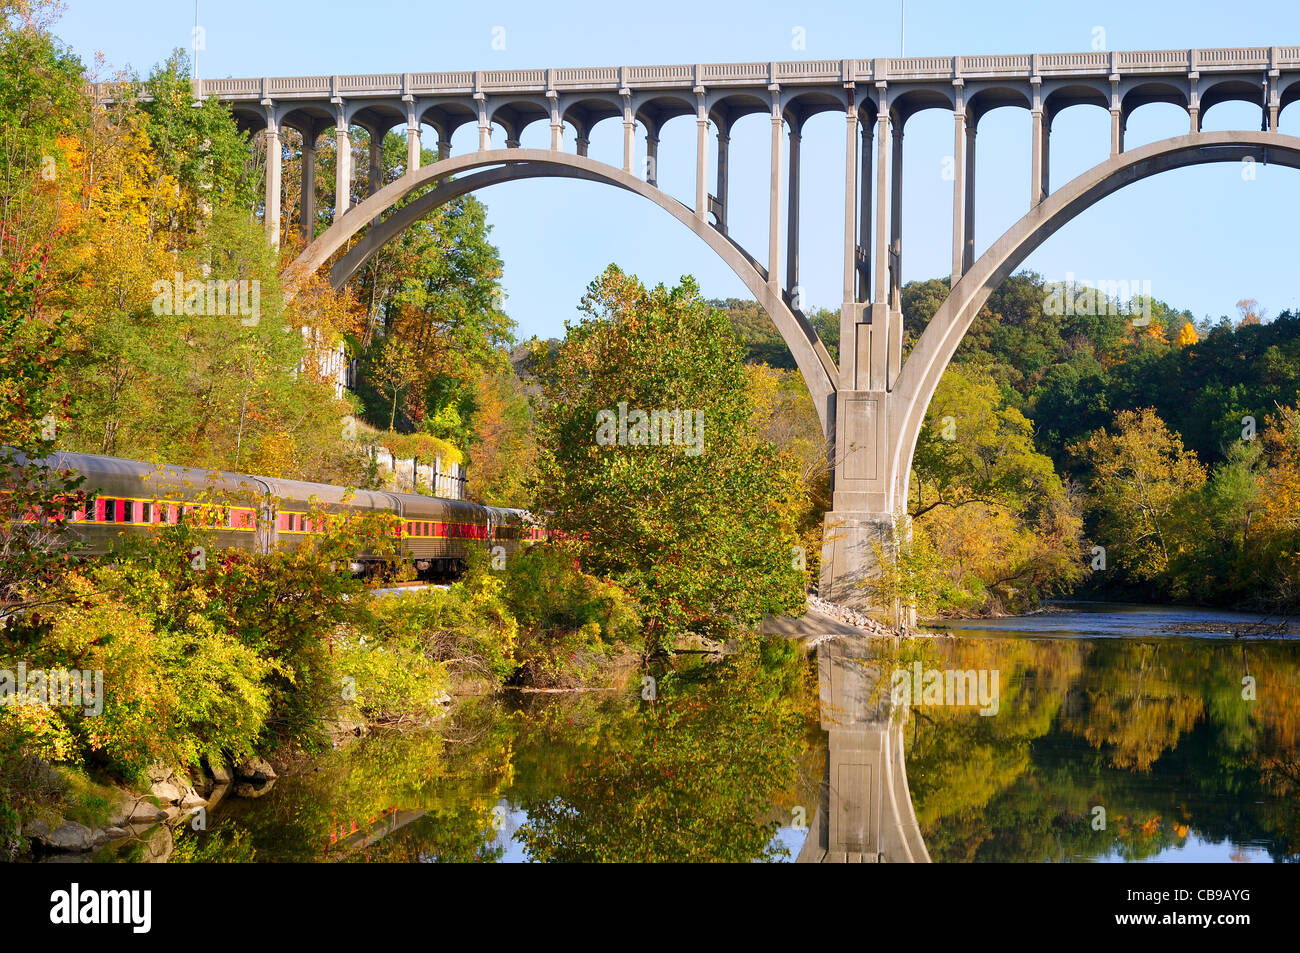 Passenger cars of a train pass under a high bridge in a scenic area Stock Photo